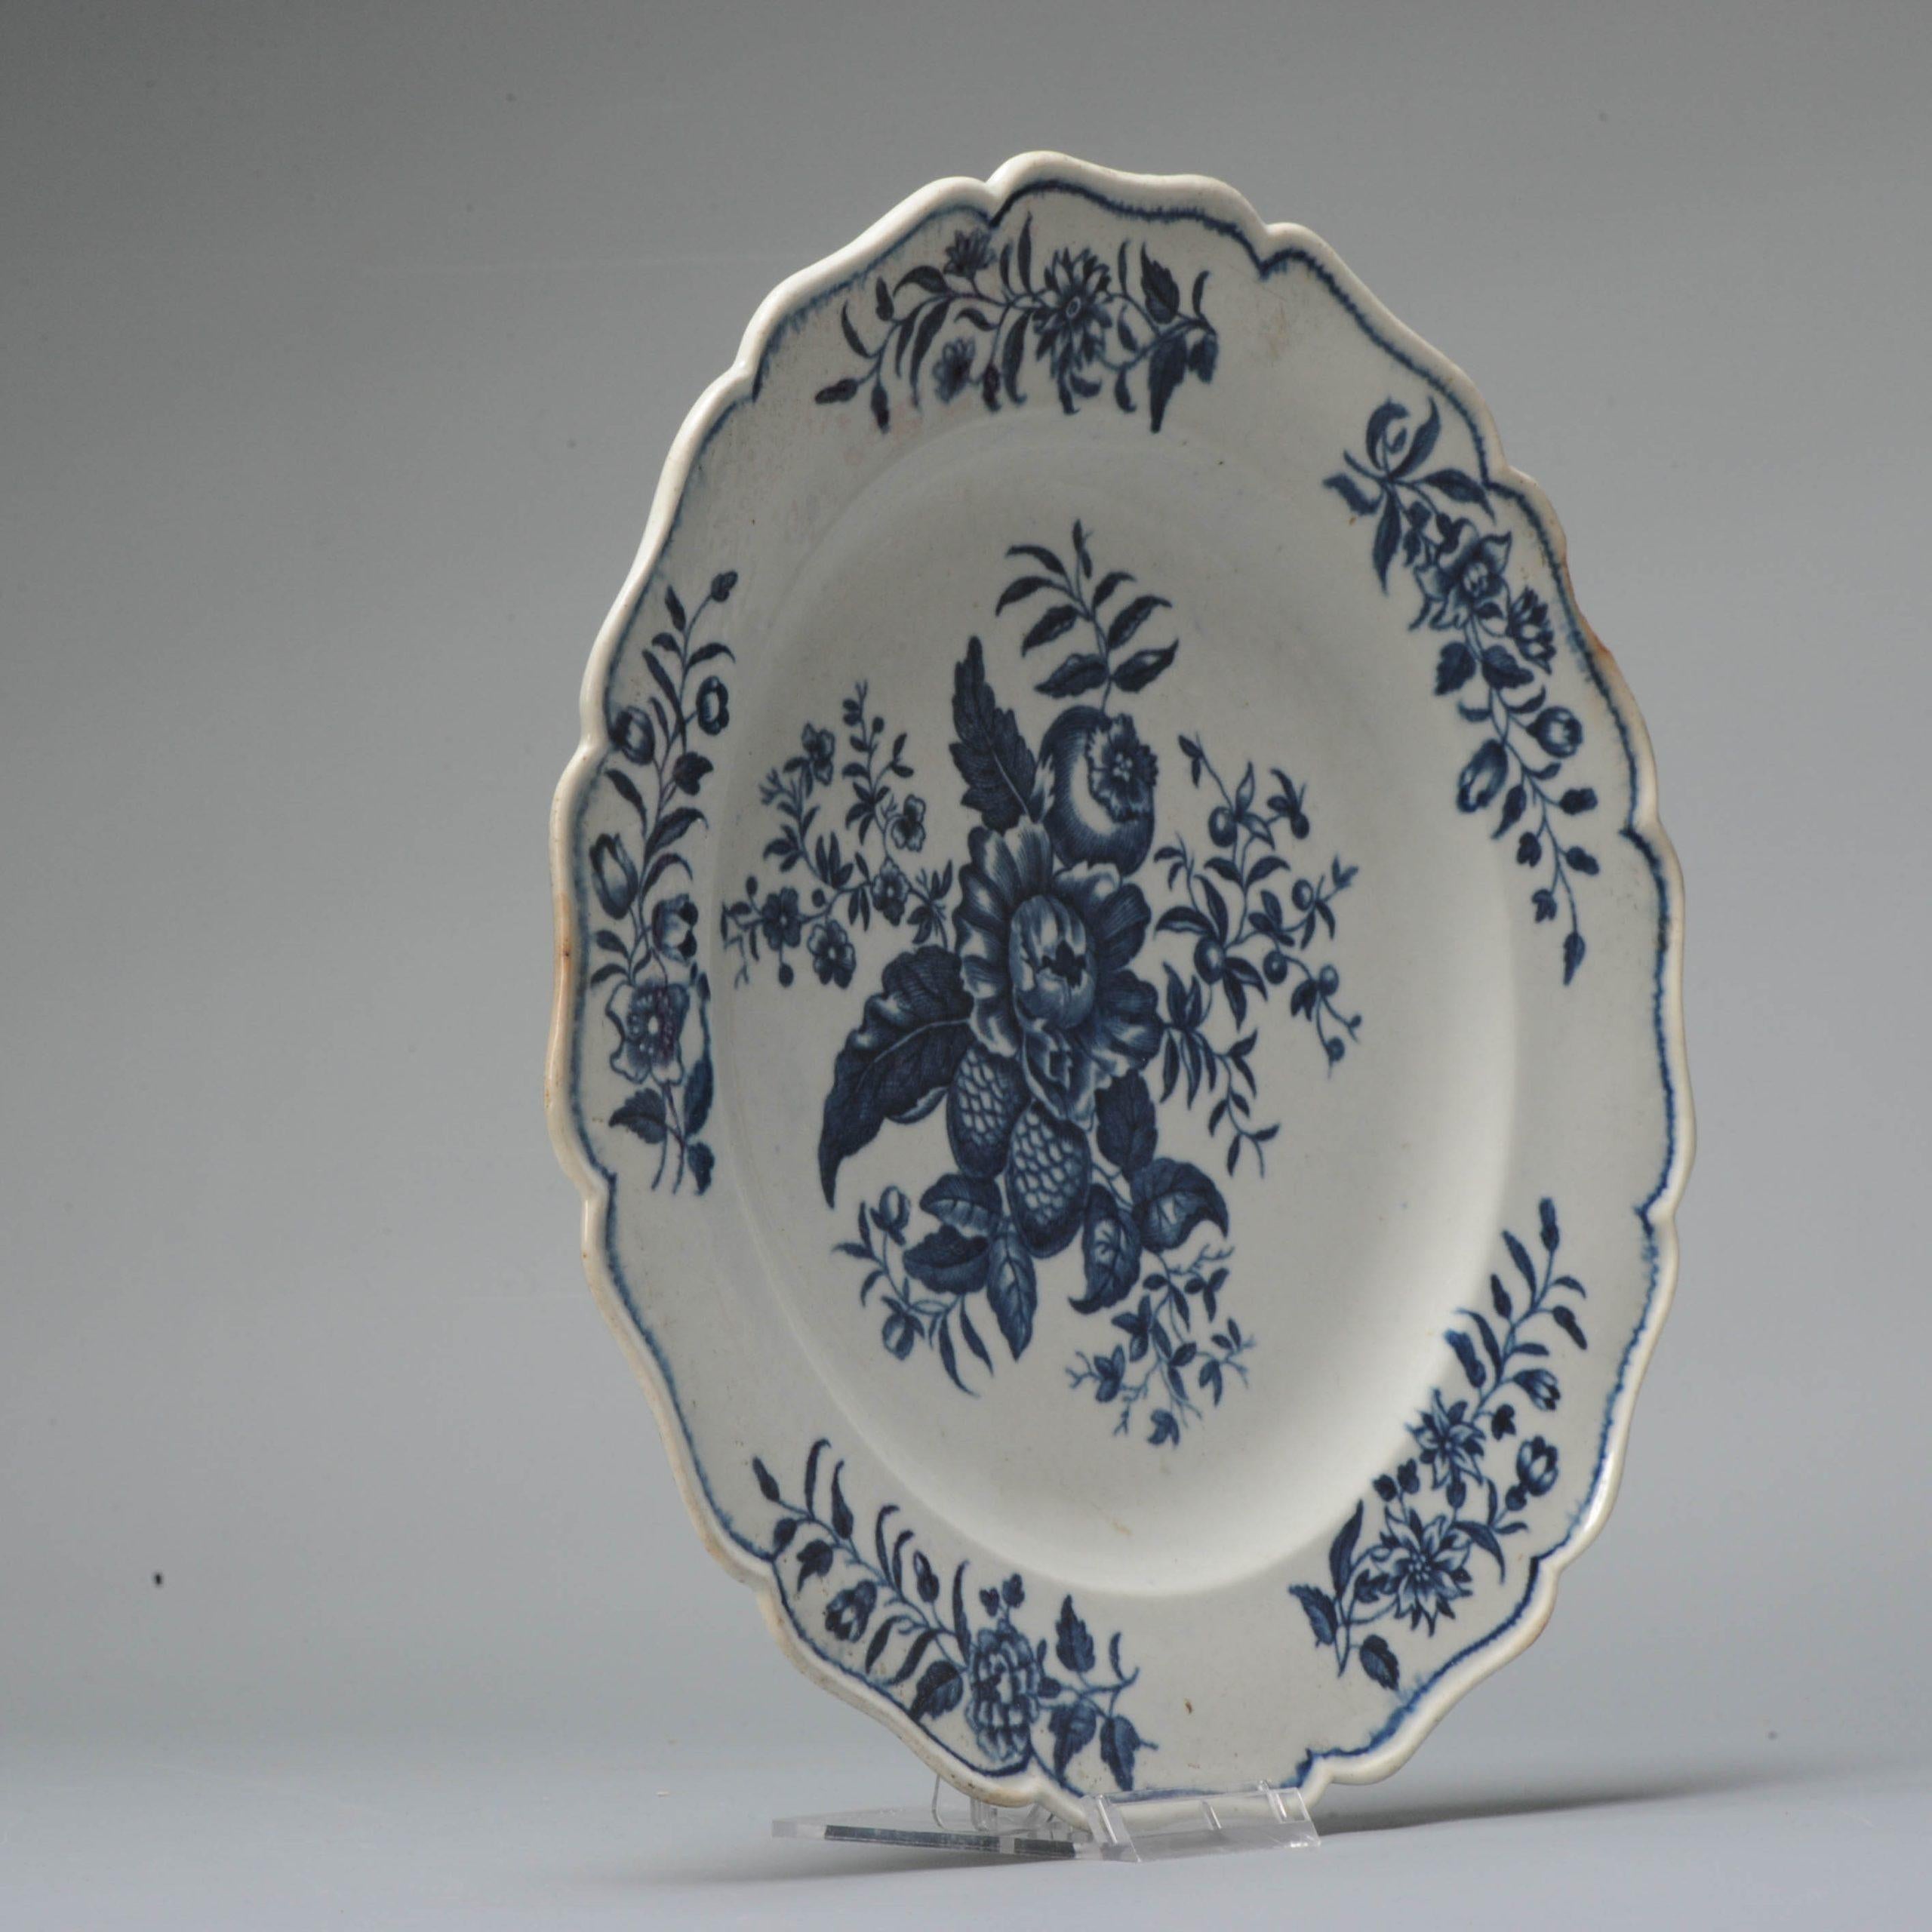 An exquisite nicely shaped and good sized Worcester plate with moon crest mark at base.

Additional information:
Material: Porcelain & Pottery
Type: Plates
Color: Blue & White
Region of Origin: Europe
Emperor: Kangxi (1661-1722)
Period: 18th